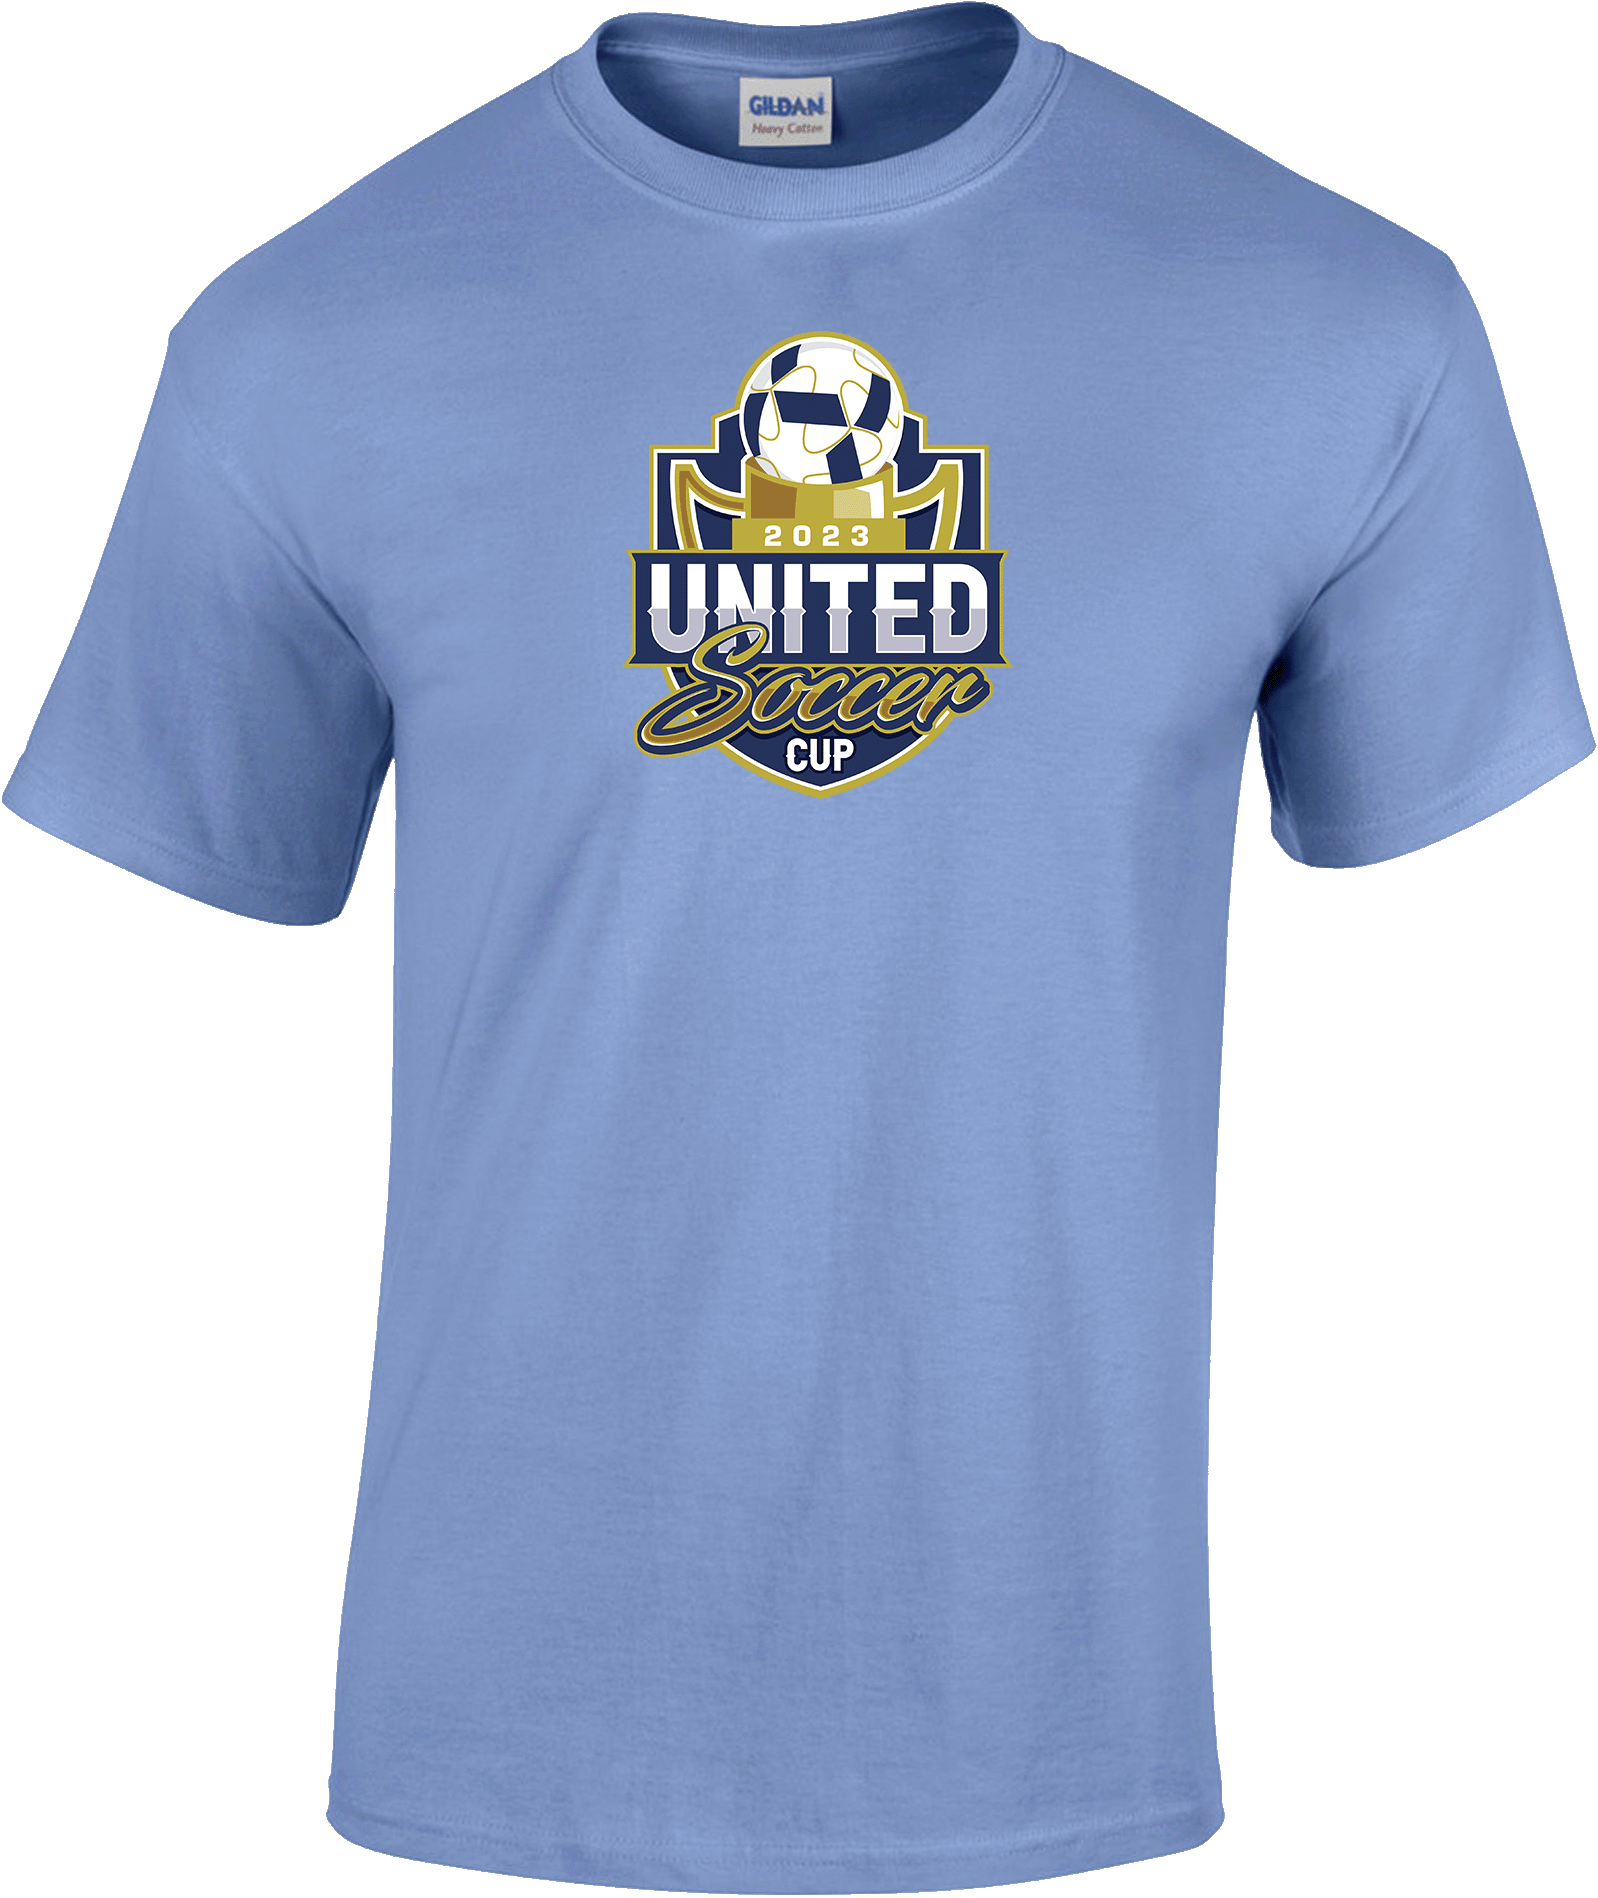 SHORT SLEEVES - 2023 United Soccer Cup